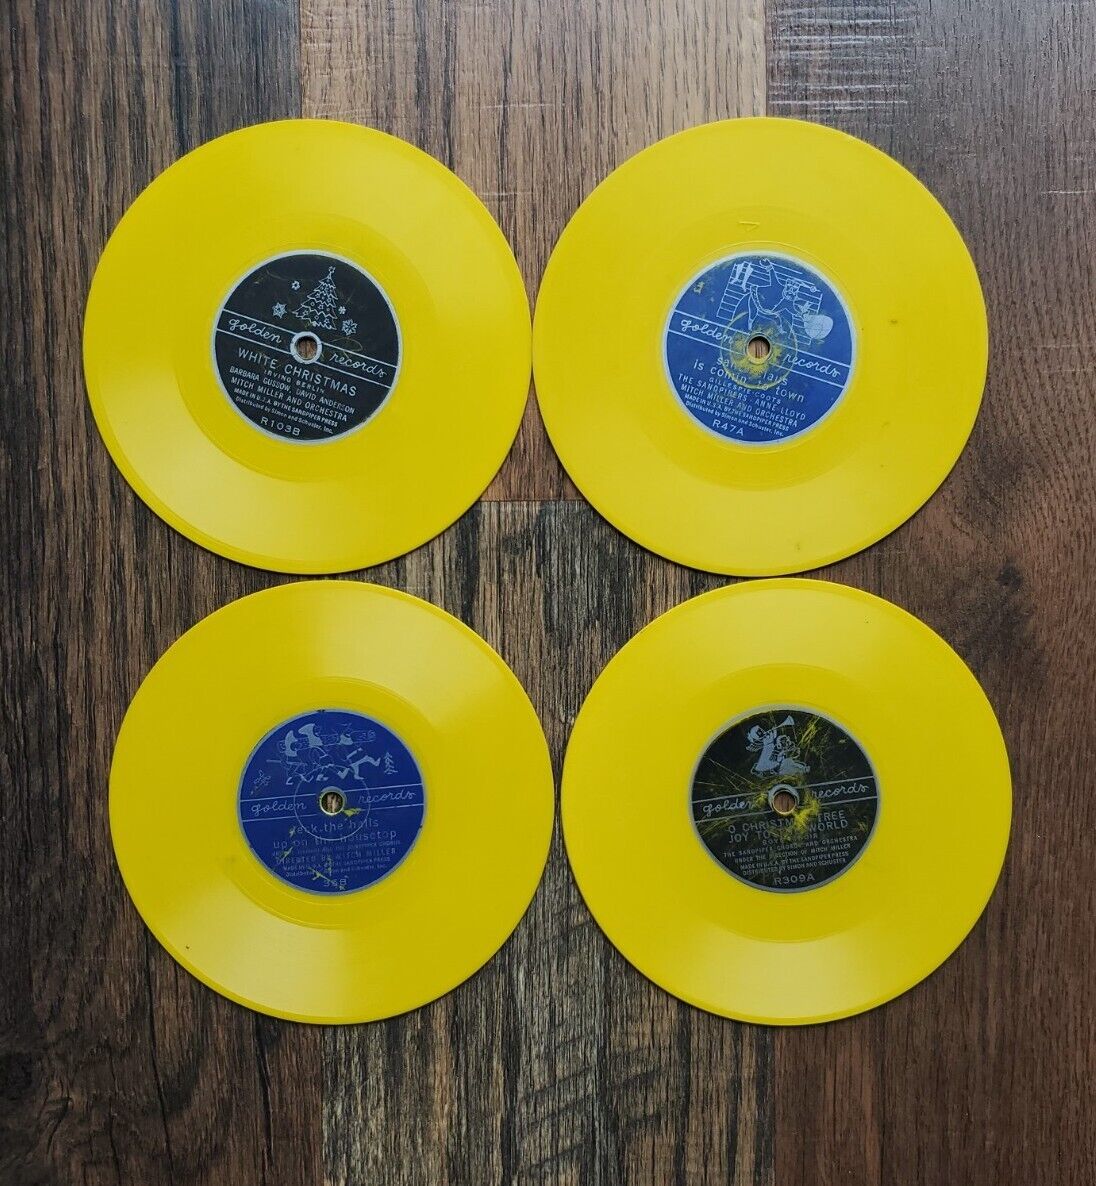 Lot of 4 Vintage Christmas Yellow Childrens Golden Records 78 RPM, Irving Berlin